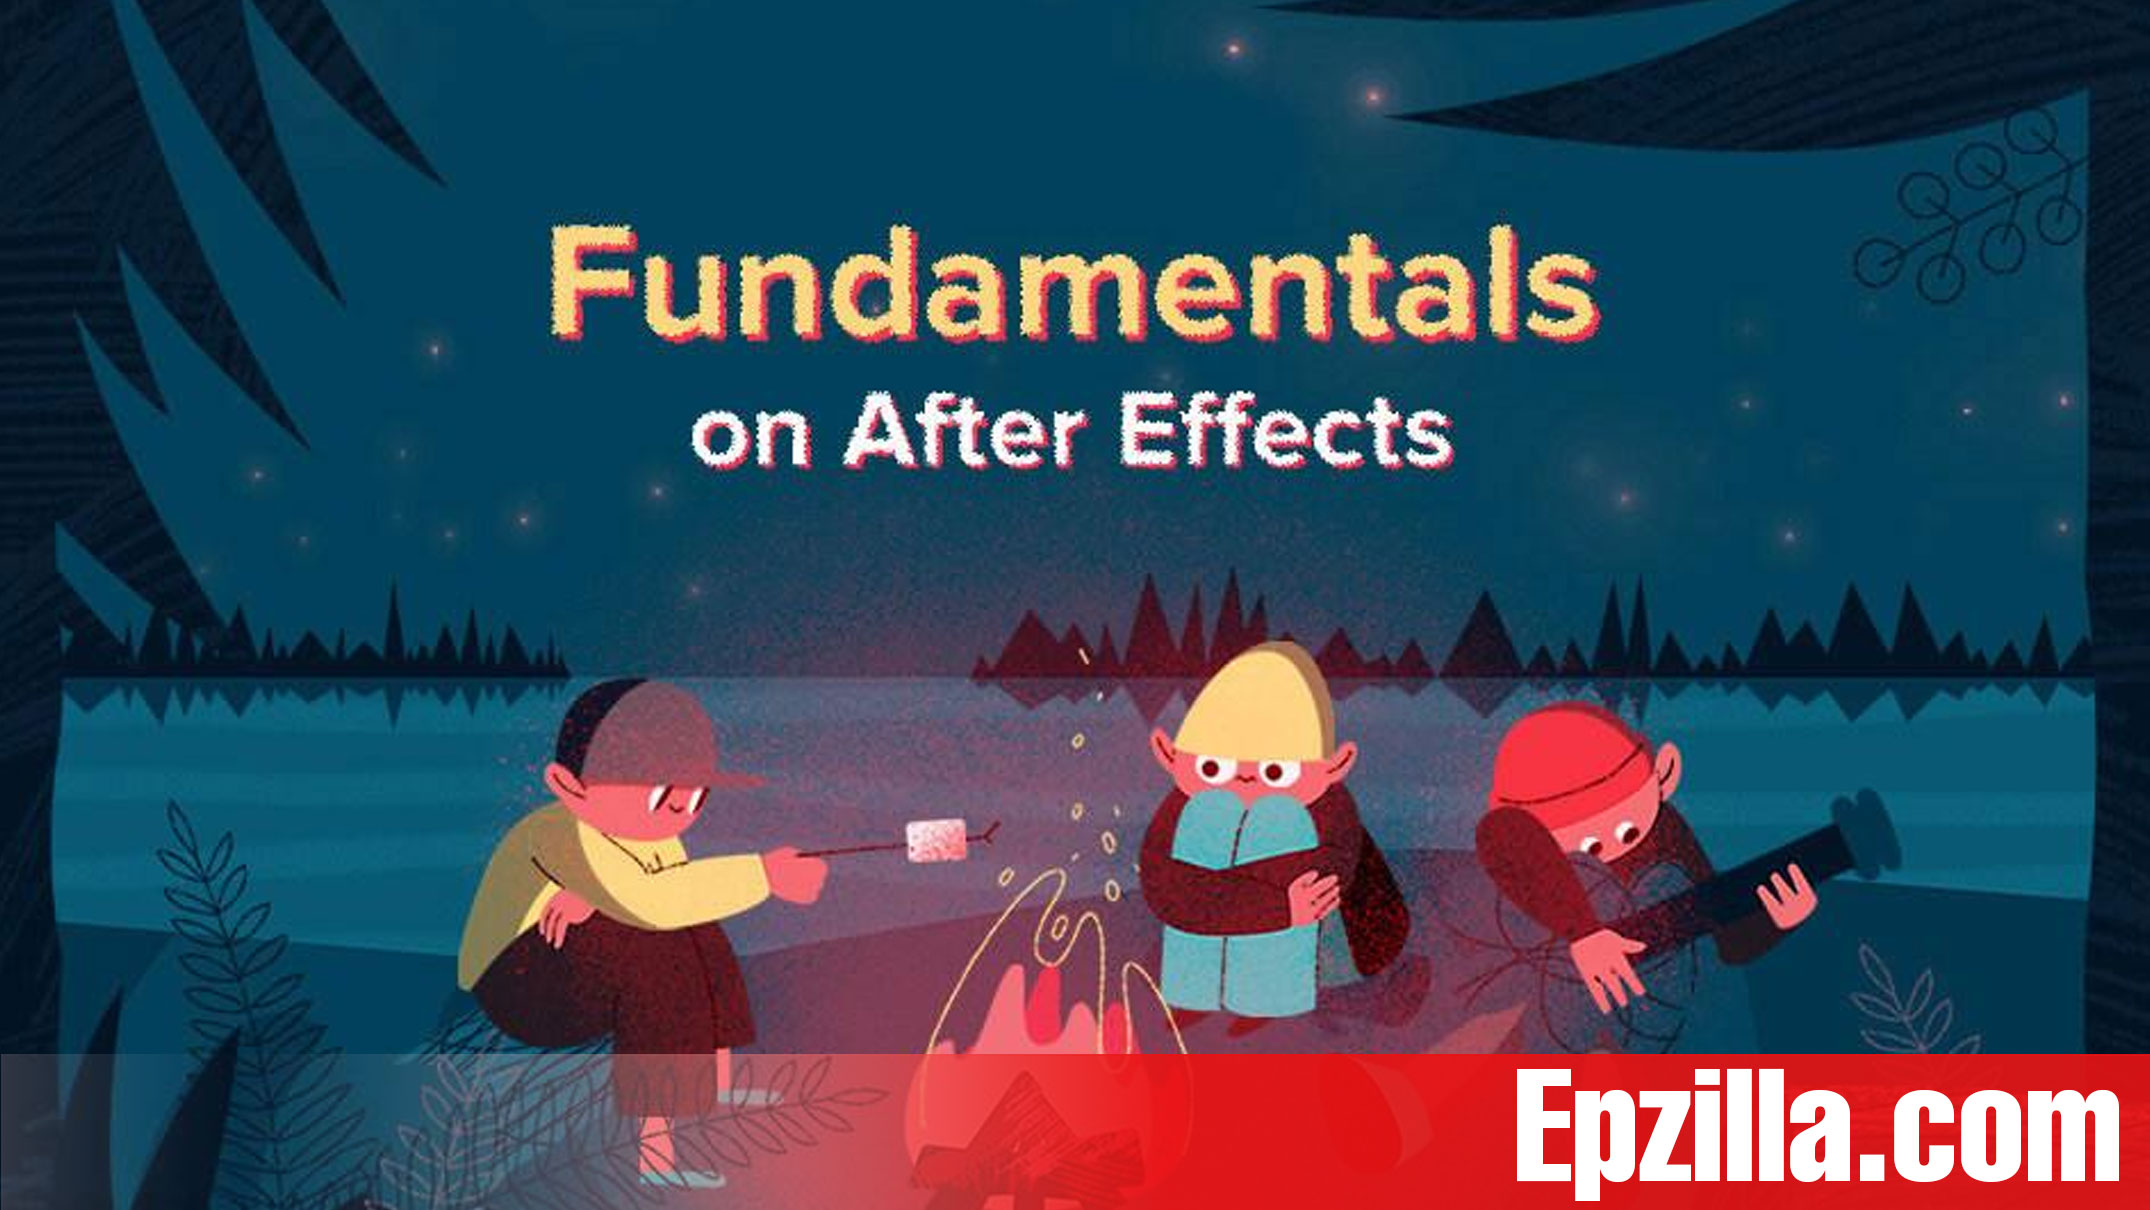 Motion Design School Fundamentals on After Effects Free Download From Epzilla